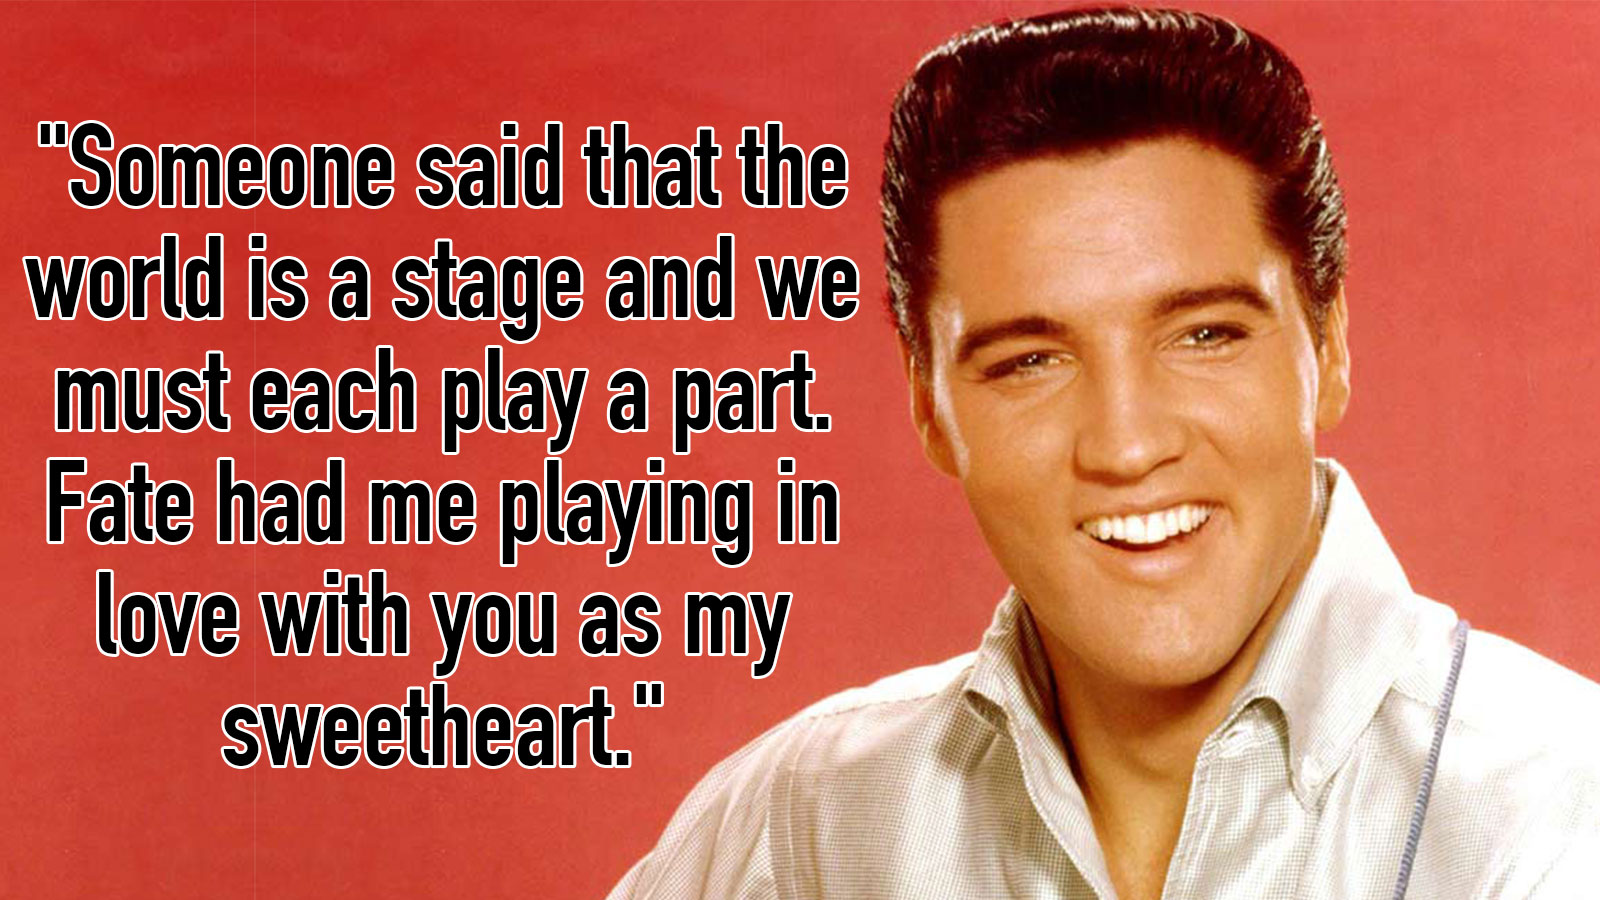 Can You Guess Which Elvis Presley Song This Lyric Is From? 61